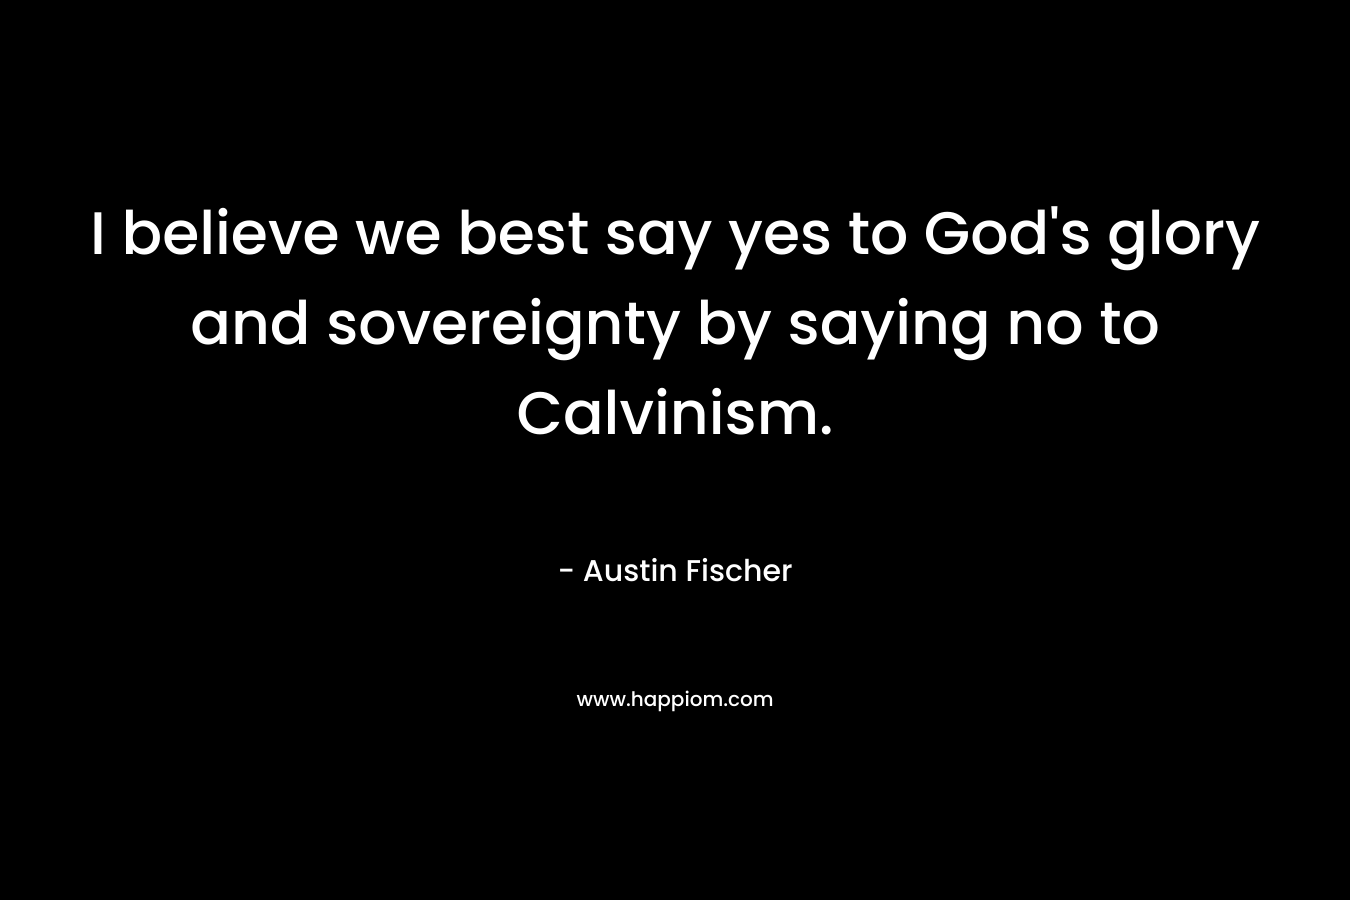 I believe we best say yes to God’s glory and sovereignty by saying no to Calvinism. – Austin Fischer